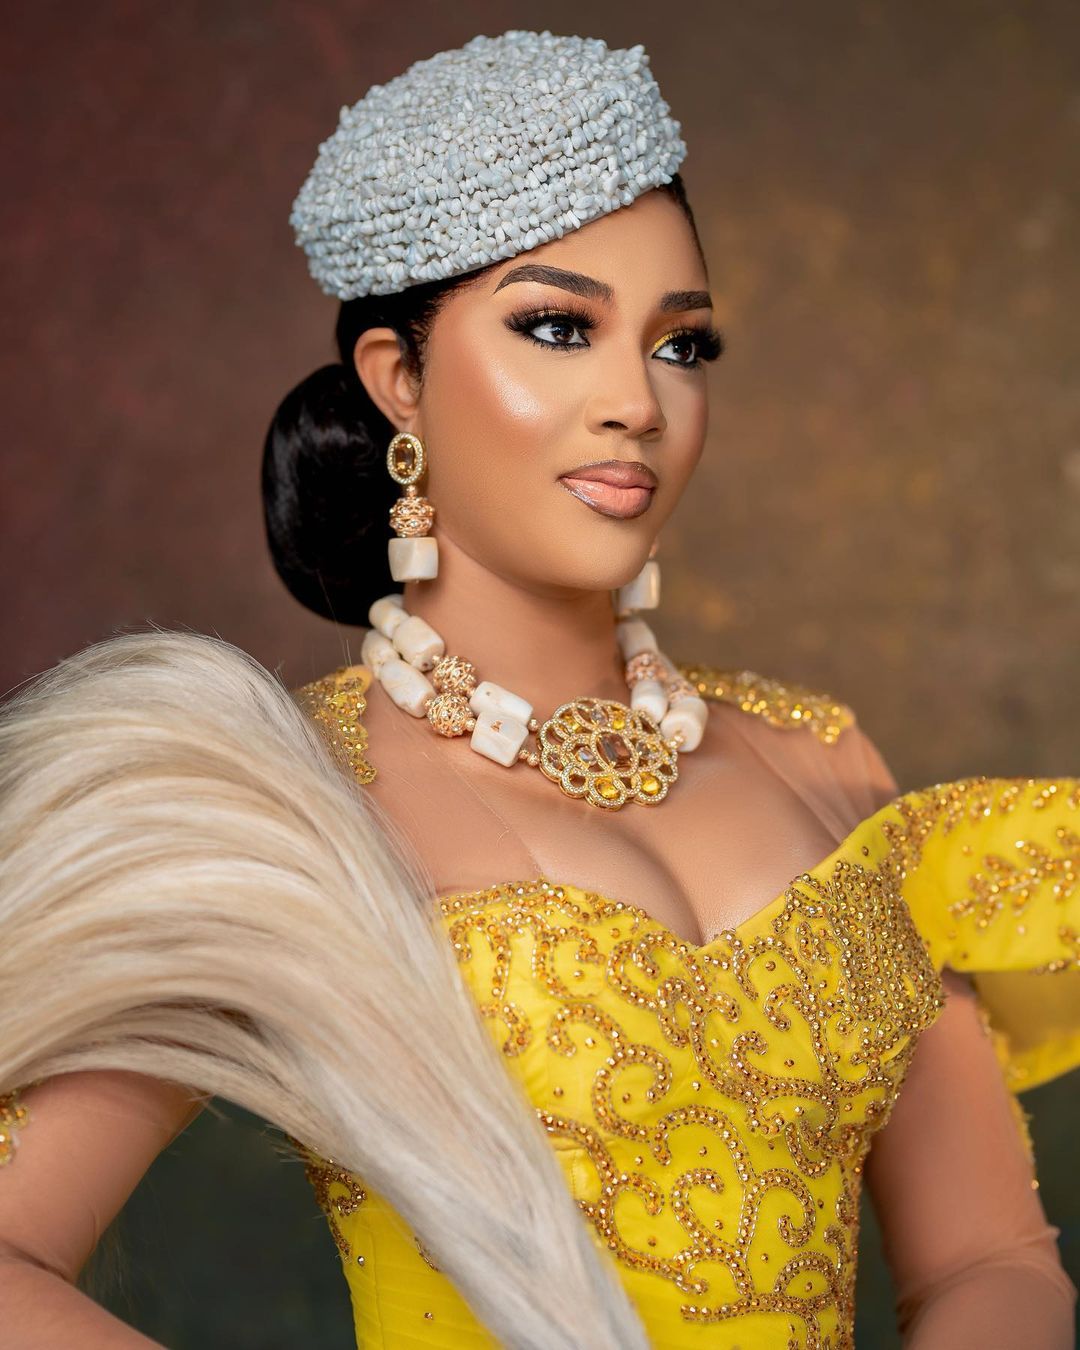 Personal The Present in Yellow With This Beautiful Igbo Bridal Inspo!